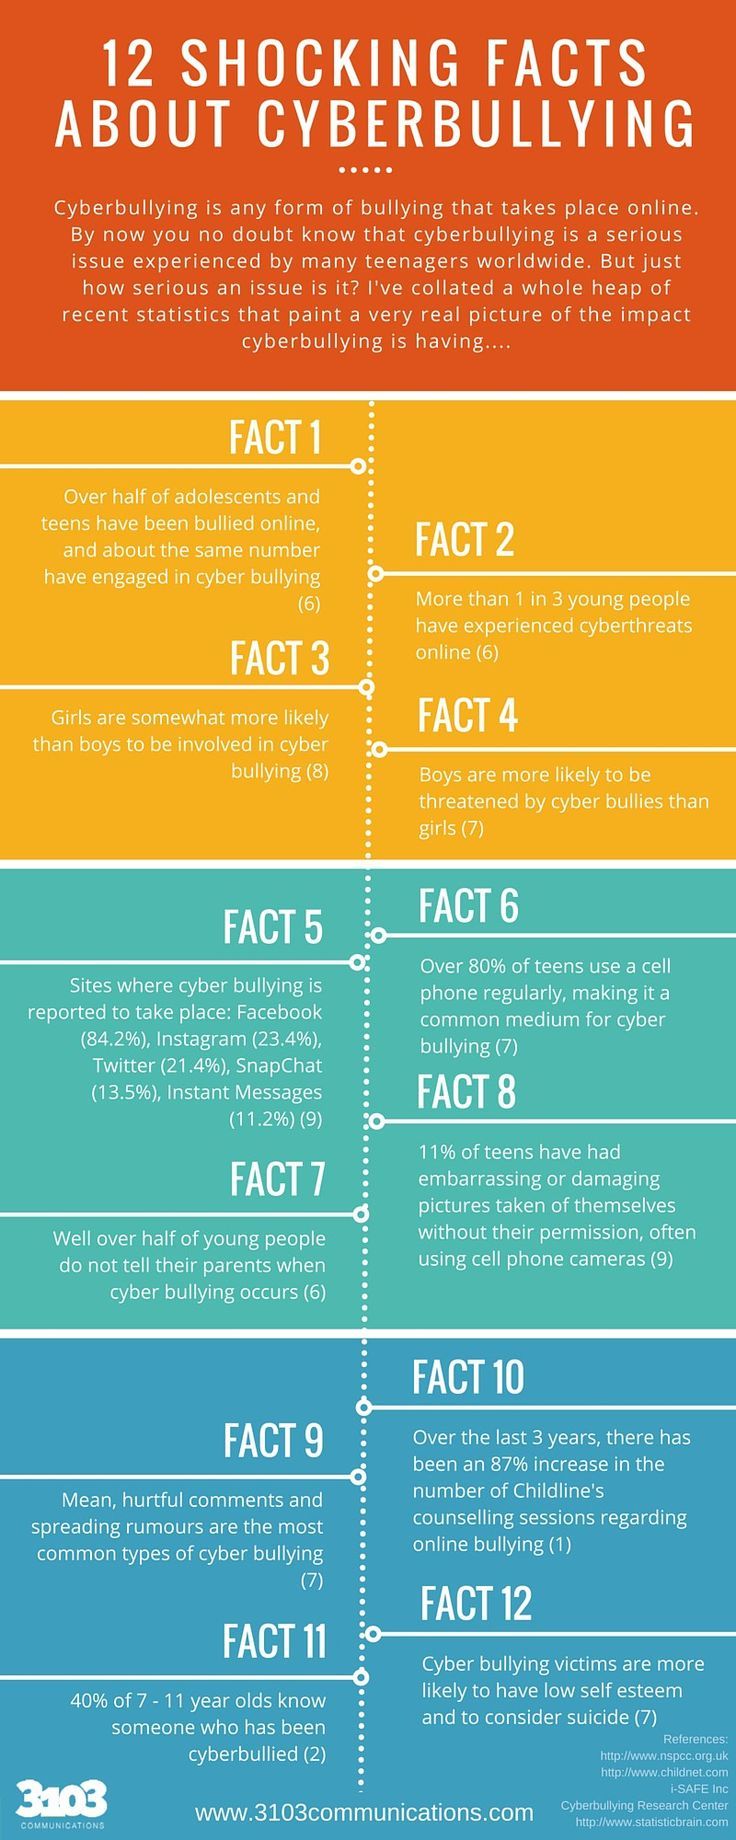 Cyber bullying facts - Cyberbullying Research Center